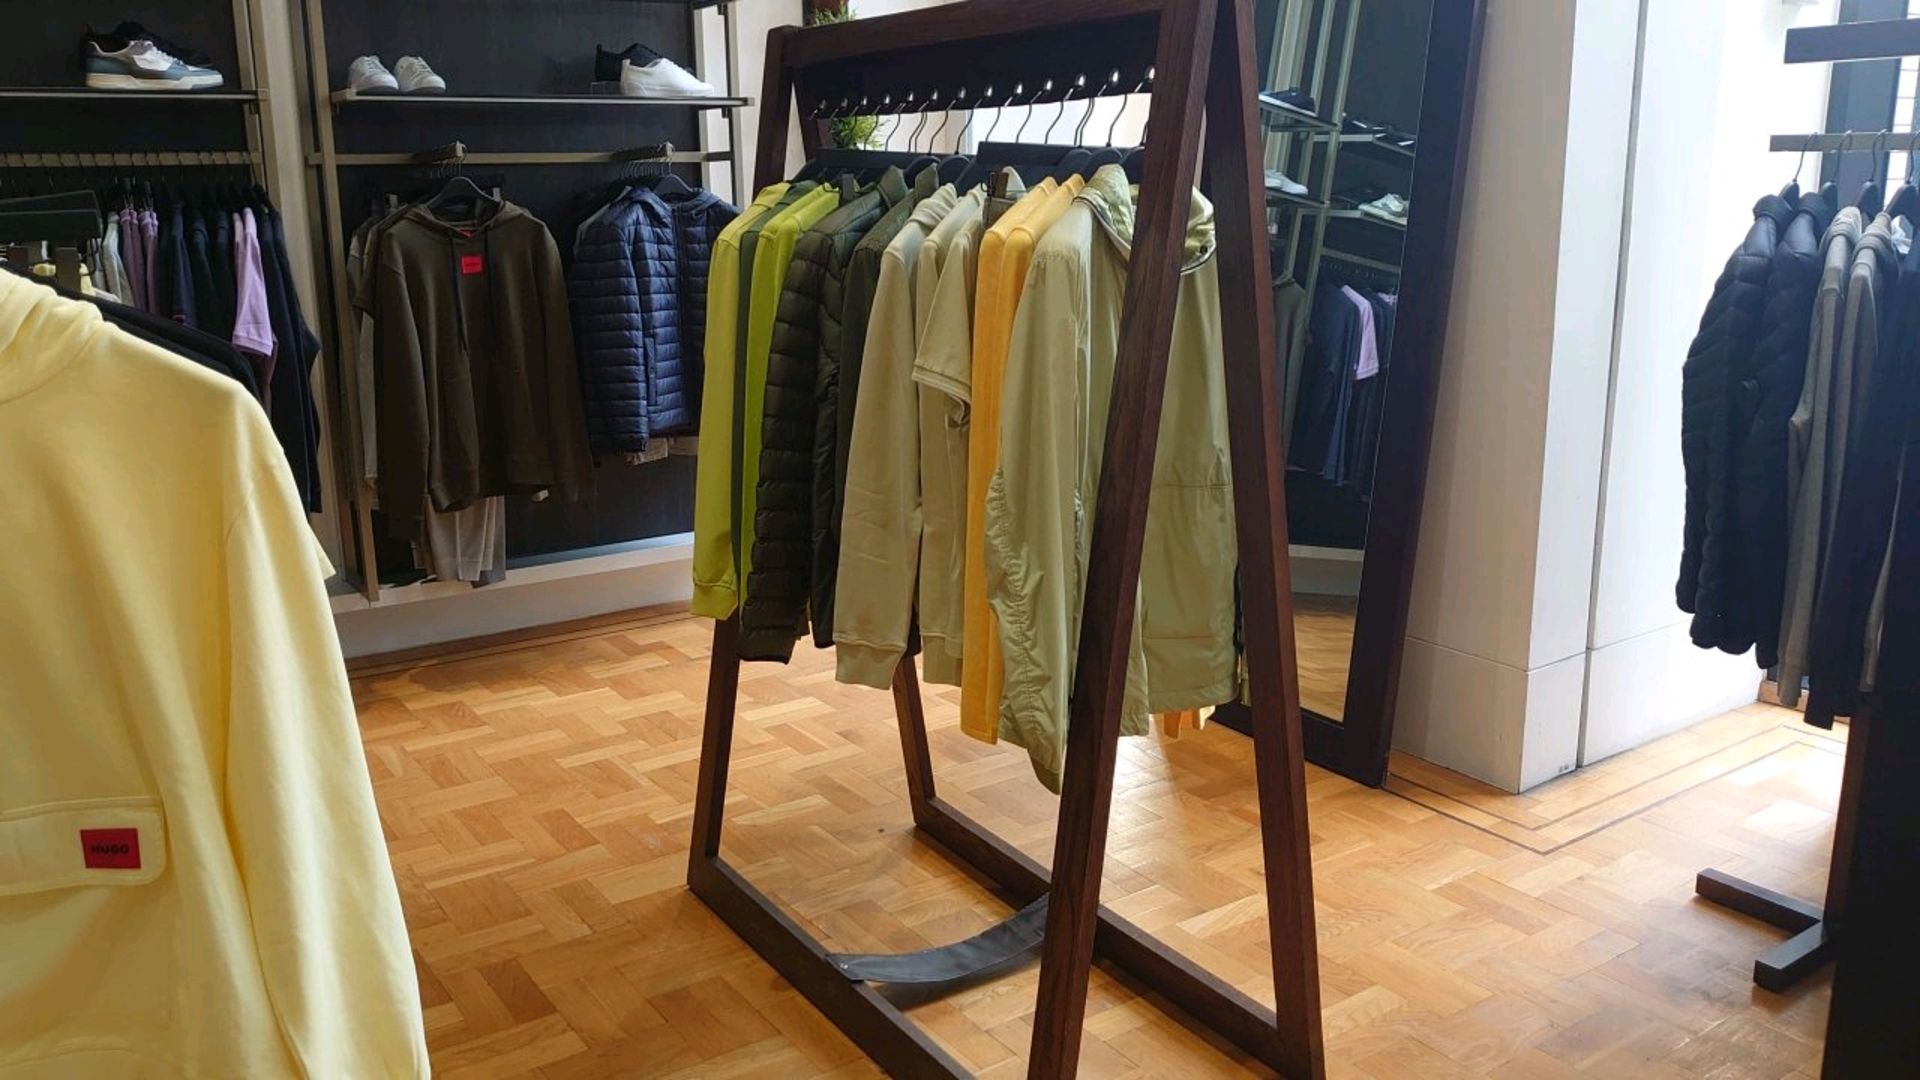 Clothes Hanging Rail X2 - Image 4 of 4